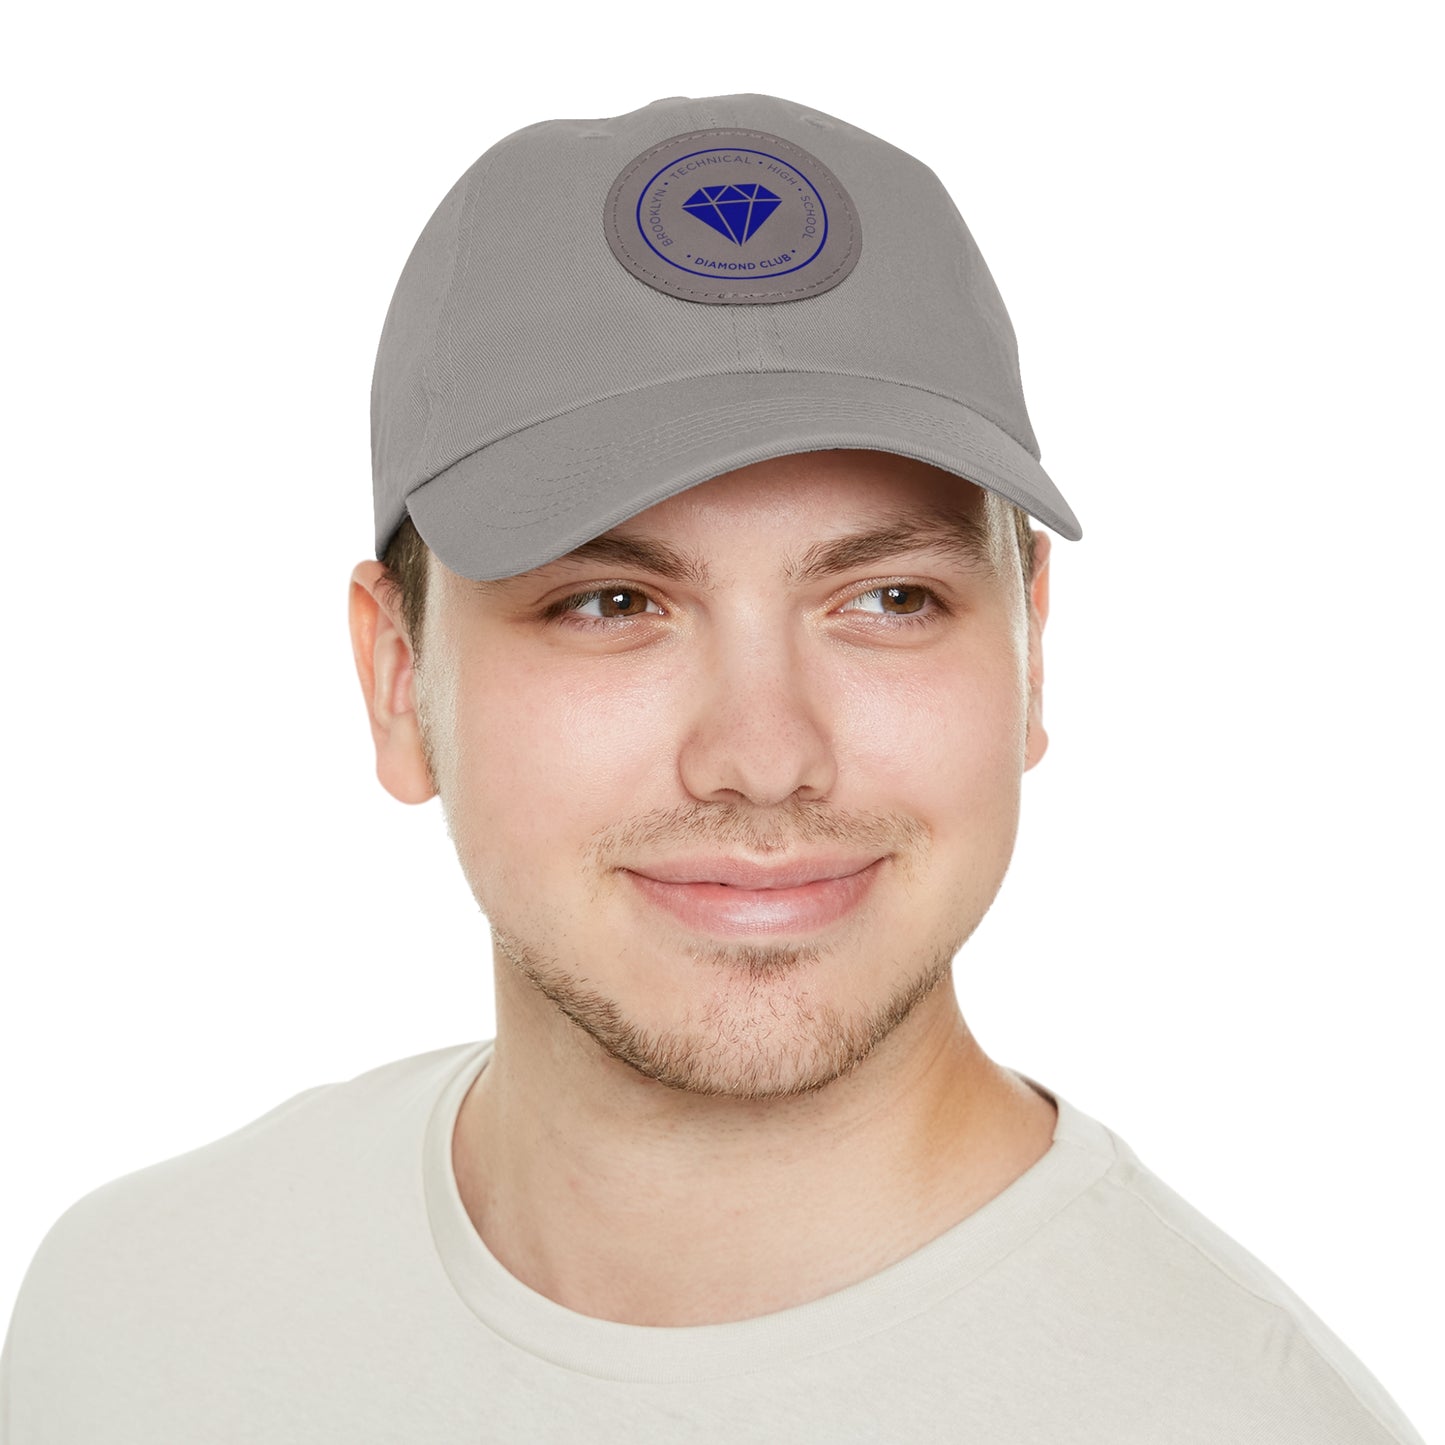 Diamond Club Logo - Hat With Circular Leather Patch - Navy